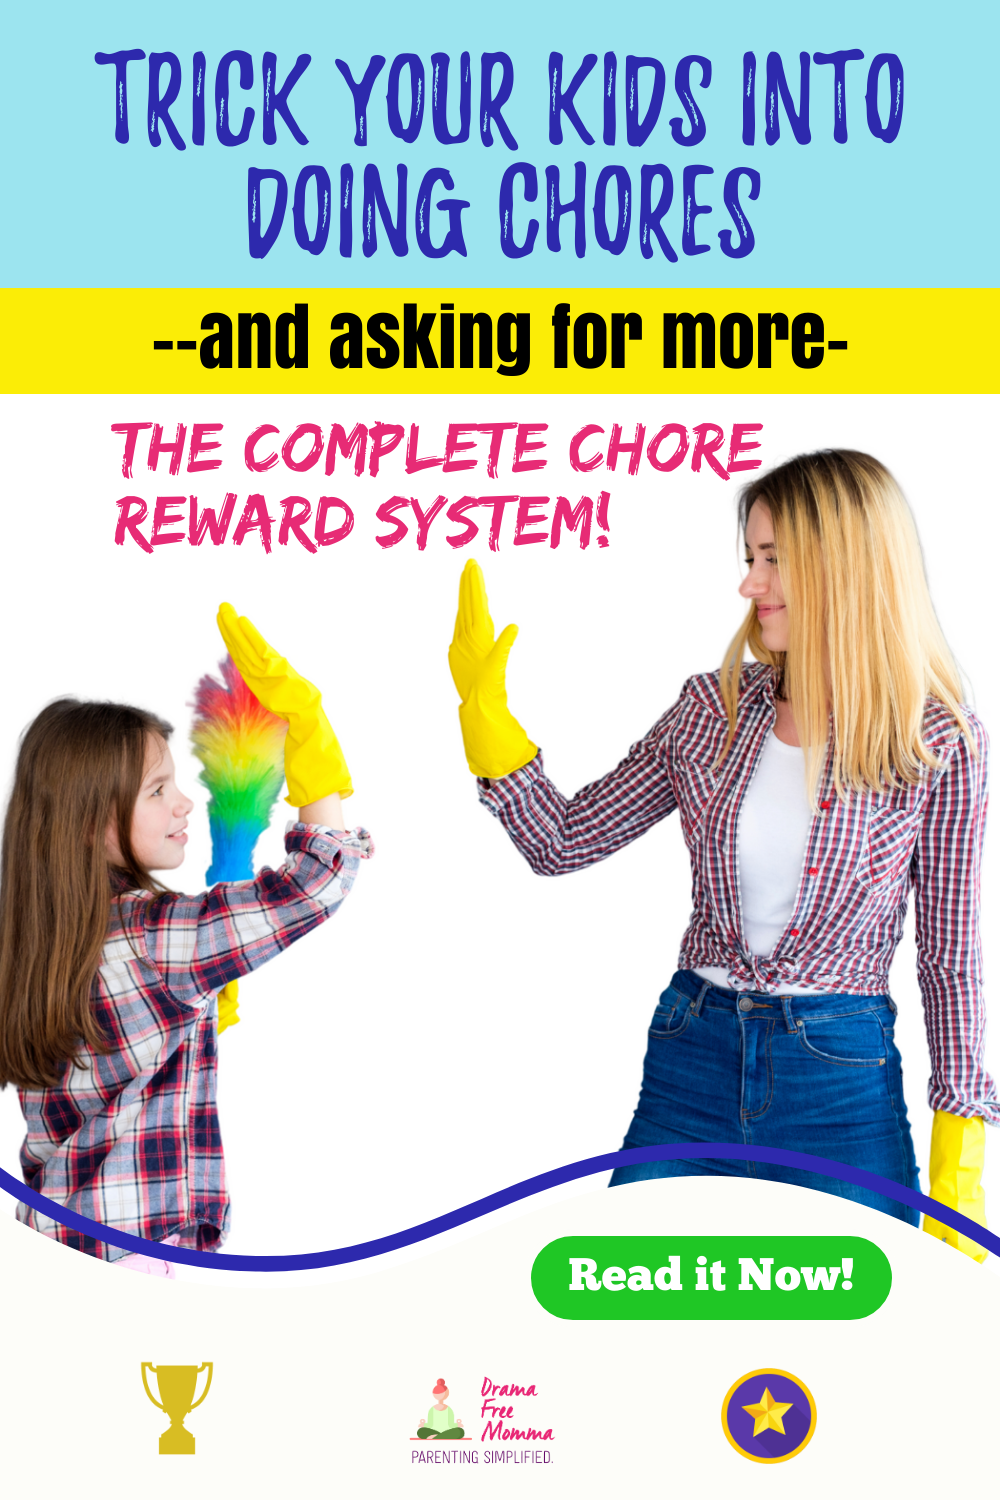 free printable chore chart for kids, free printable chore reward chart for kids, chores for kids, free printables, age appropriate chores, chore list template, chore rewards for kids, chore rewards template, chores for kids, Complete chore reward system, daily chore checklist for kids, how to get kids to do chores